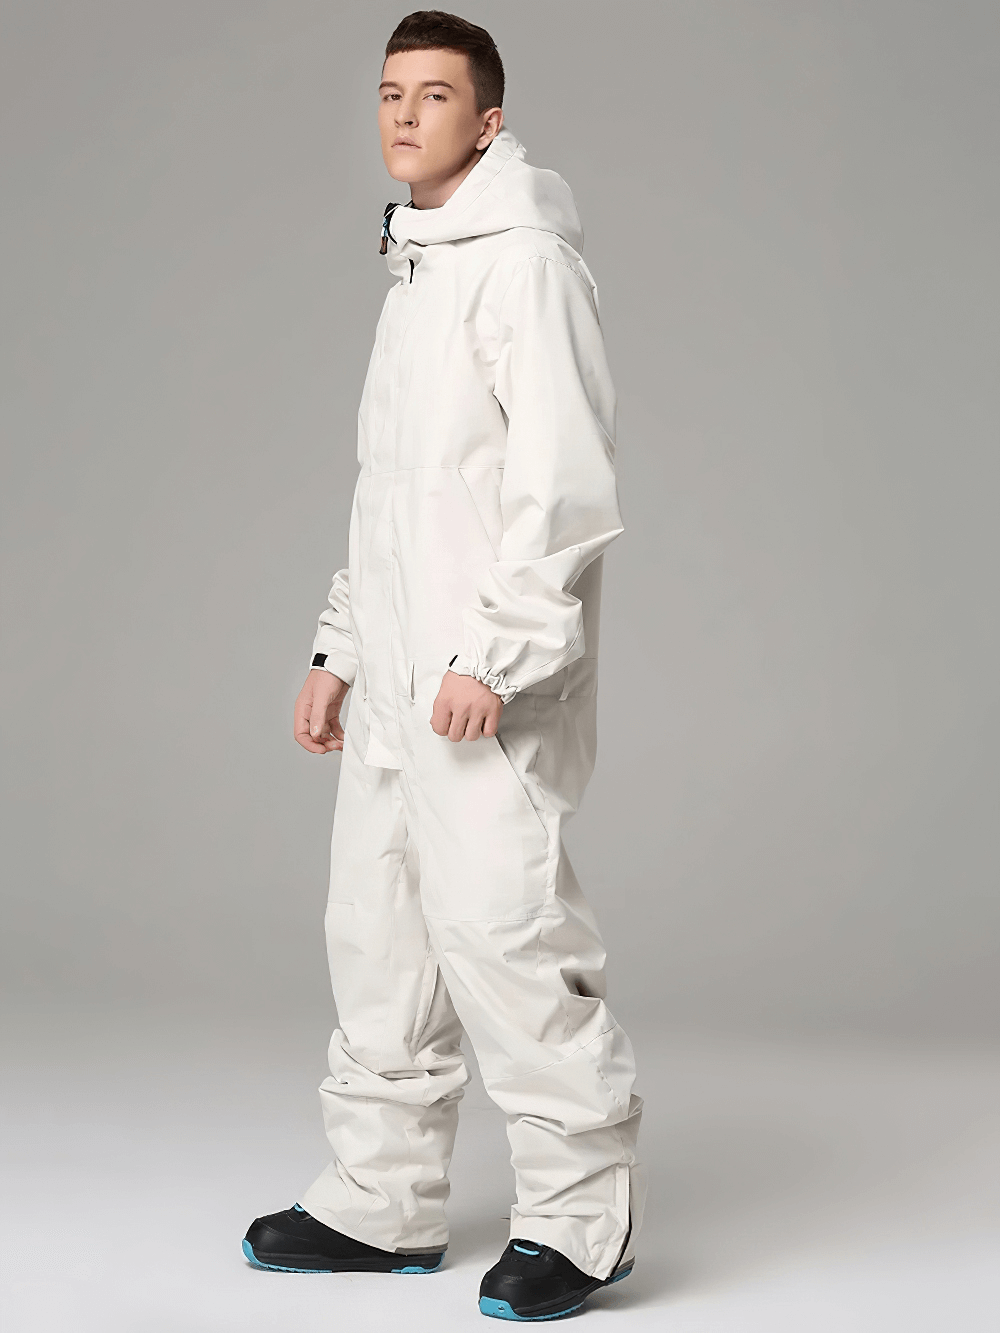 Stylish Male Hooded Snowsuit for Skiing Adventures - SF2048